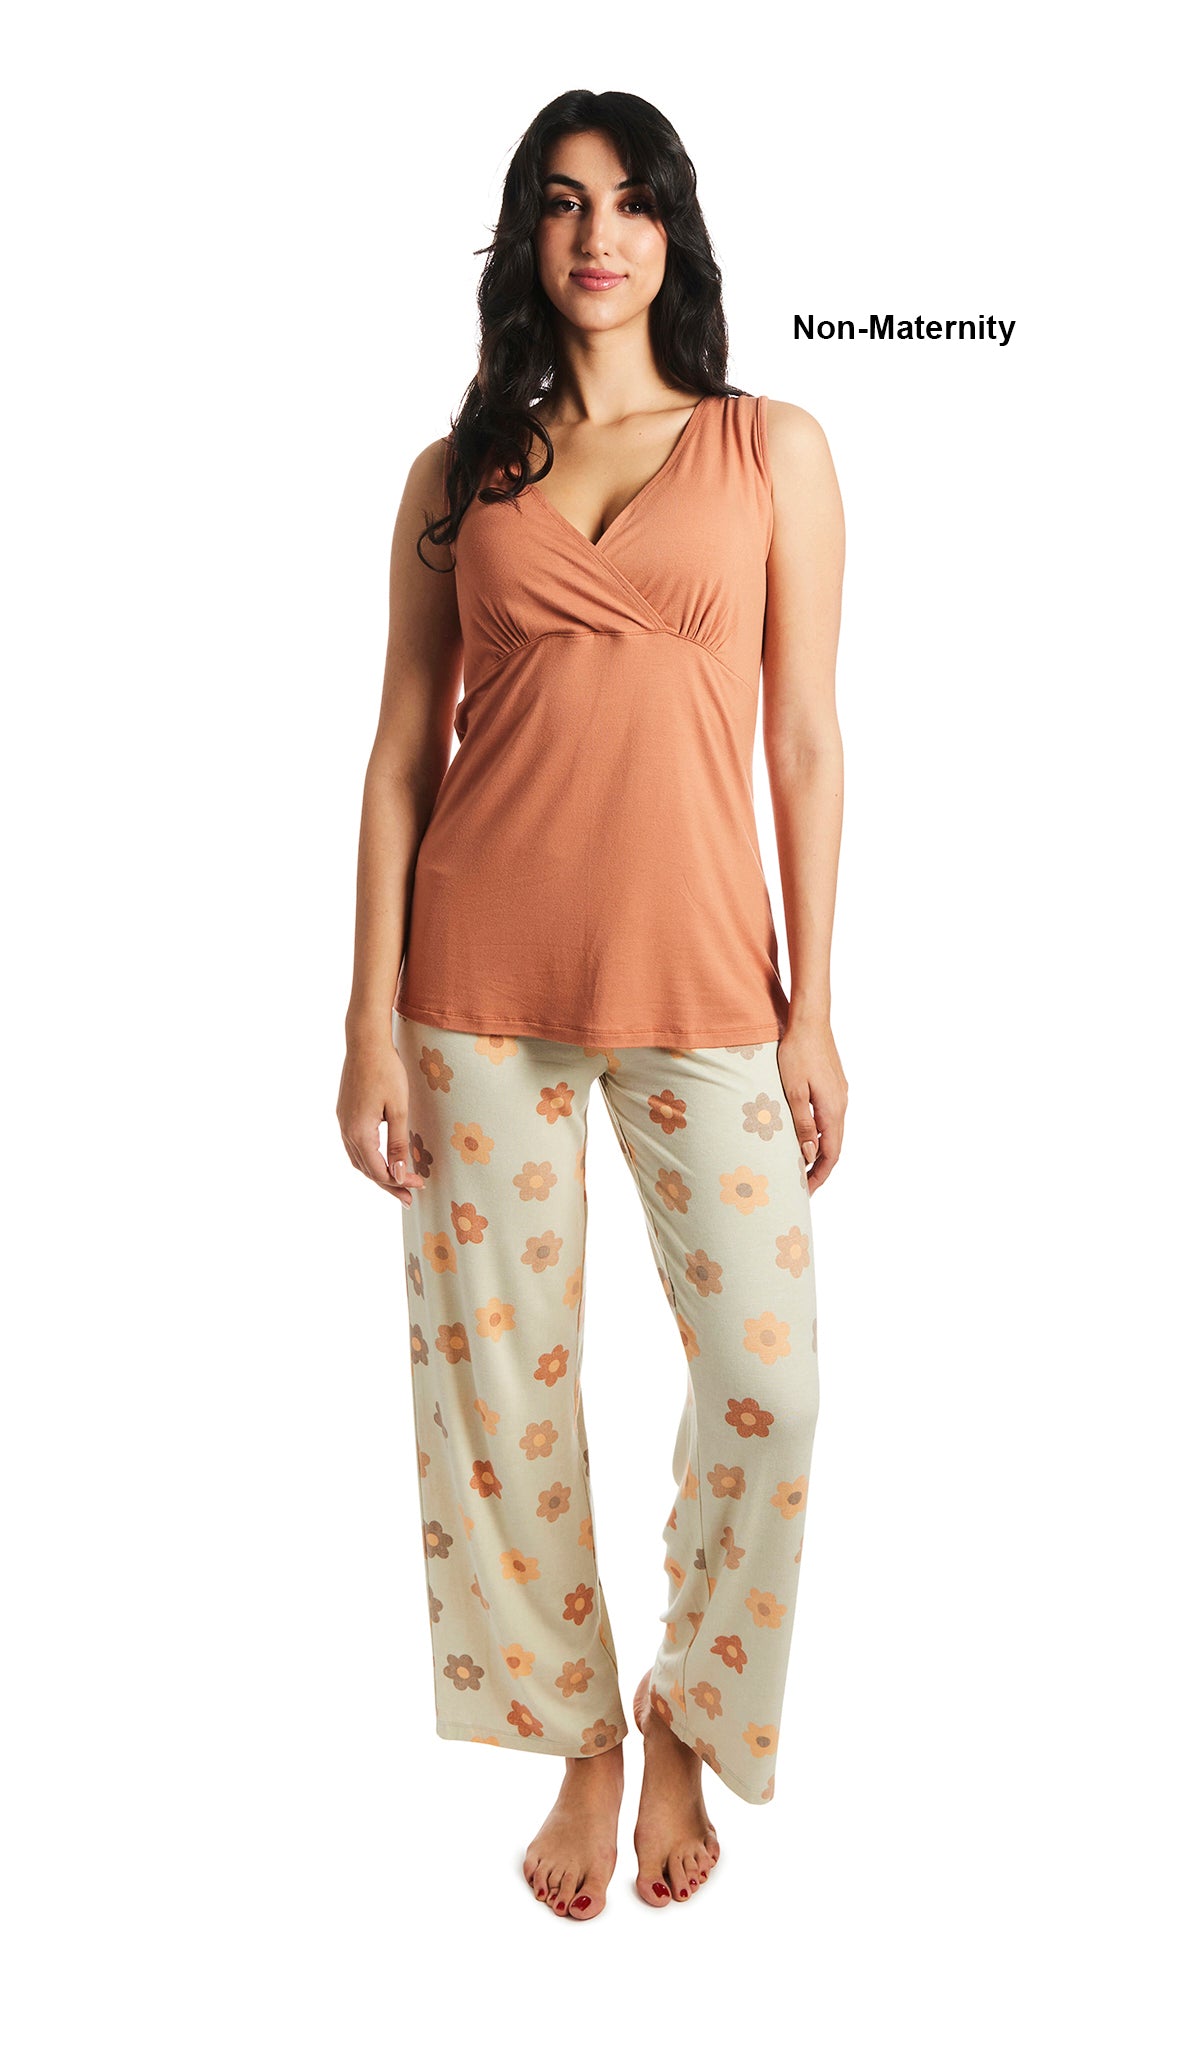 Daisies Analise 3-Piece Set, pregnant woman wearing criss-cross bust tank top and pant as non-maternity.